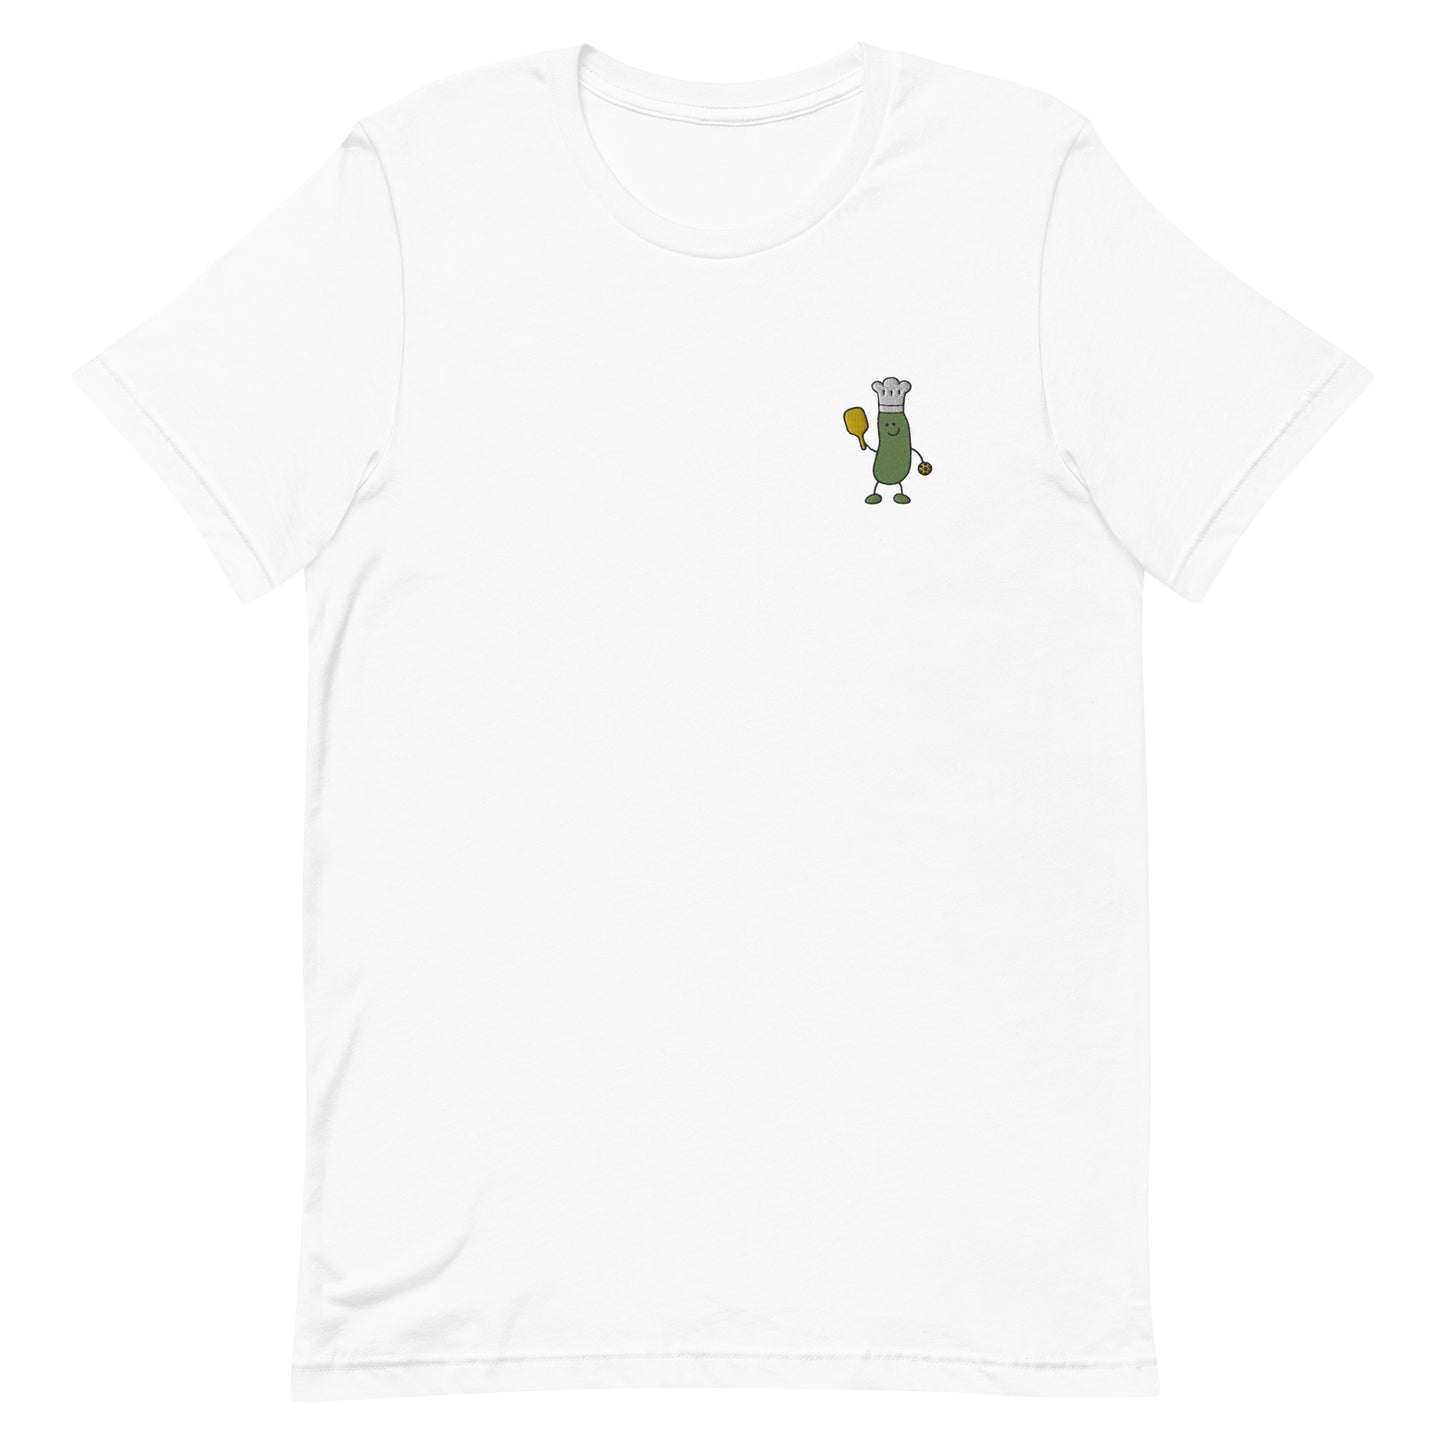 Chef Dinkle T-shirt